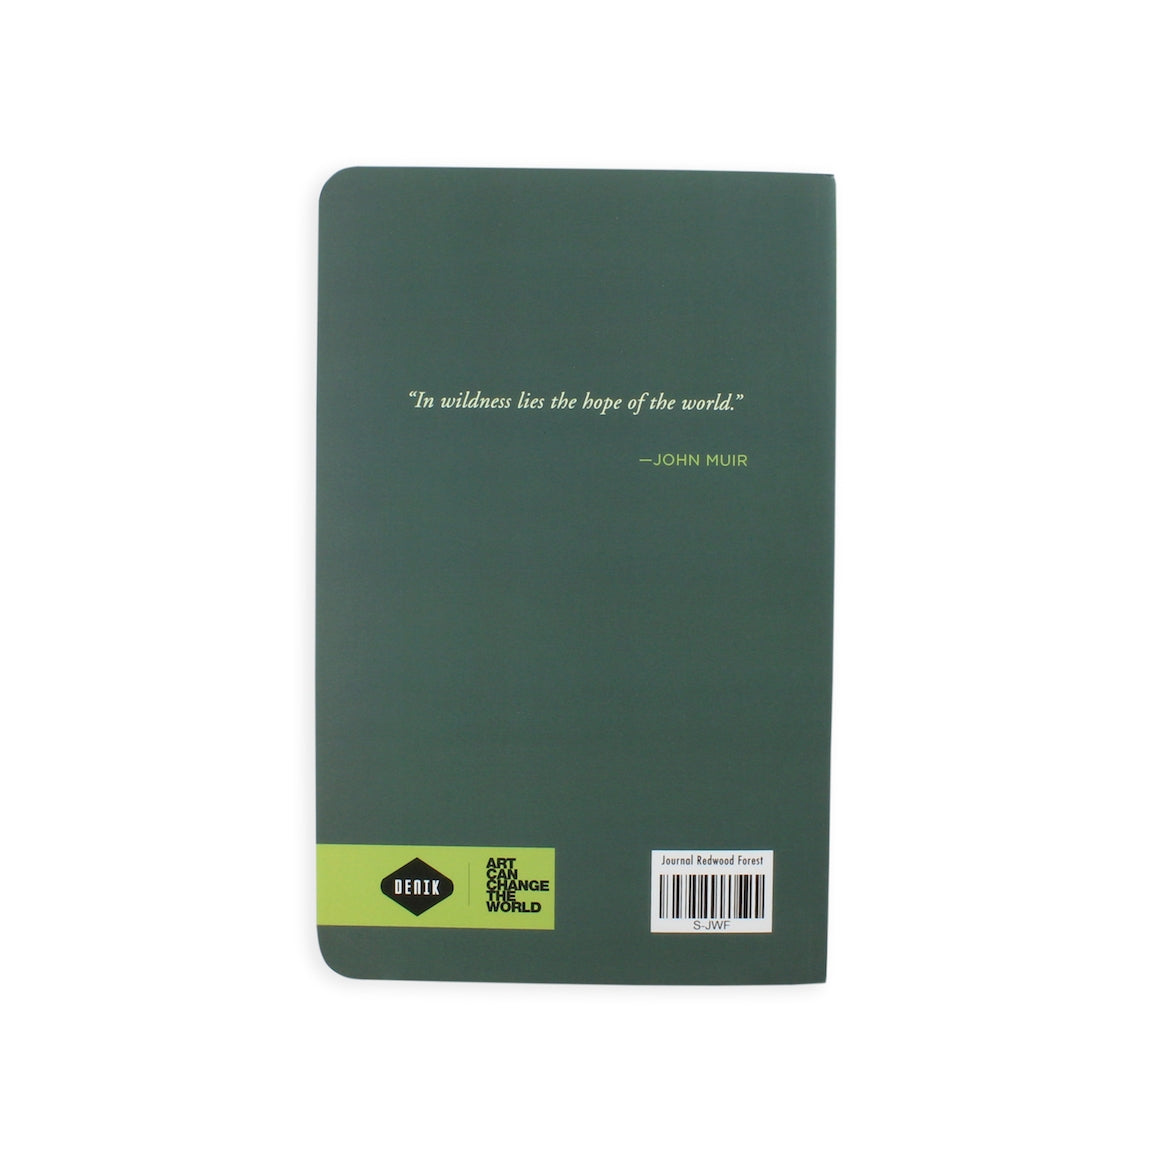 Back cover of green forest-themed journal, featuring John Muir quote: “In wildness lies the hope of the world.”